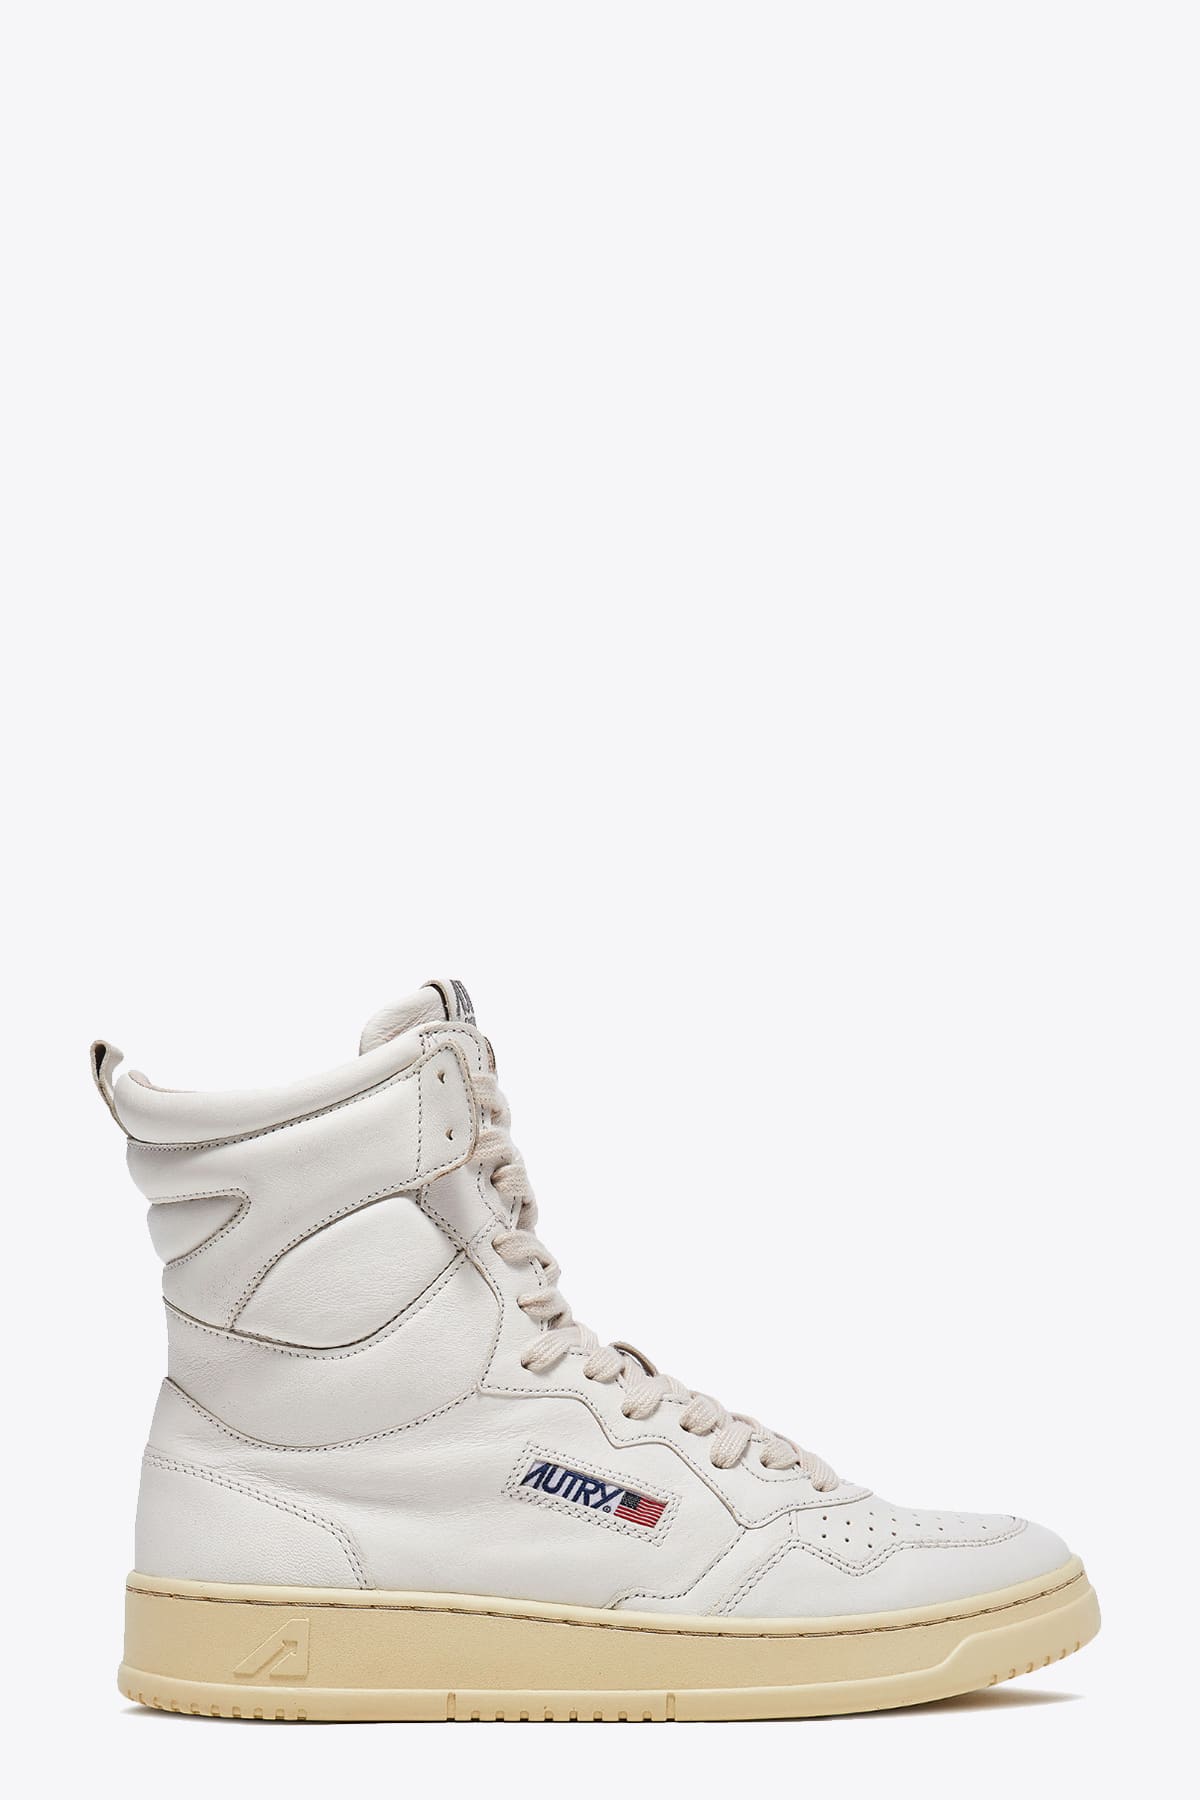 Autry Big One High Wom Leat Wht White leather high top sneaker - Big on high